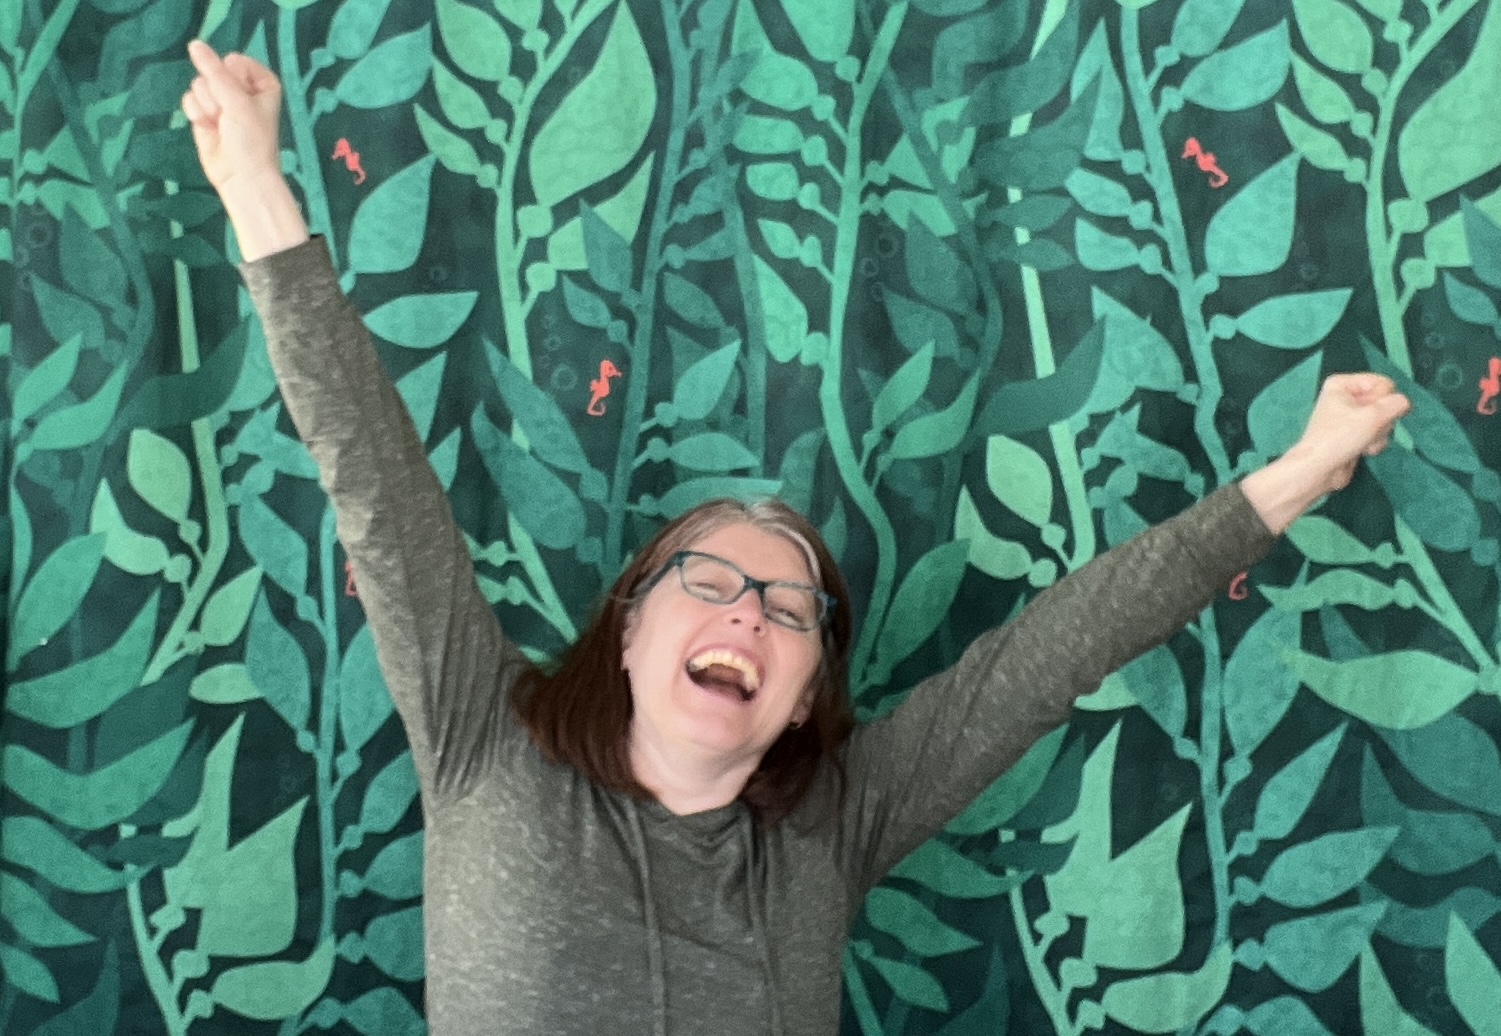 Becka is standing in front of a leafy green curtain making a celebration gesture with her hands in the air.